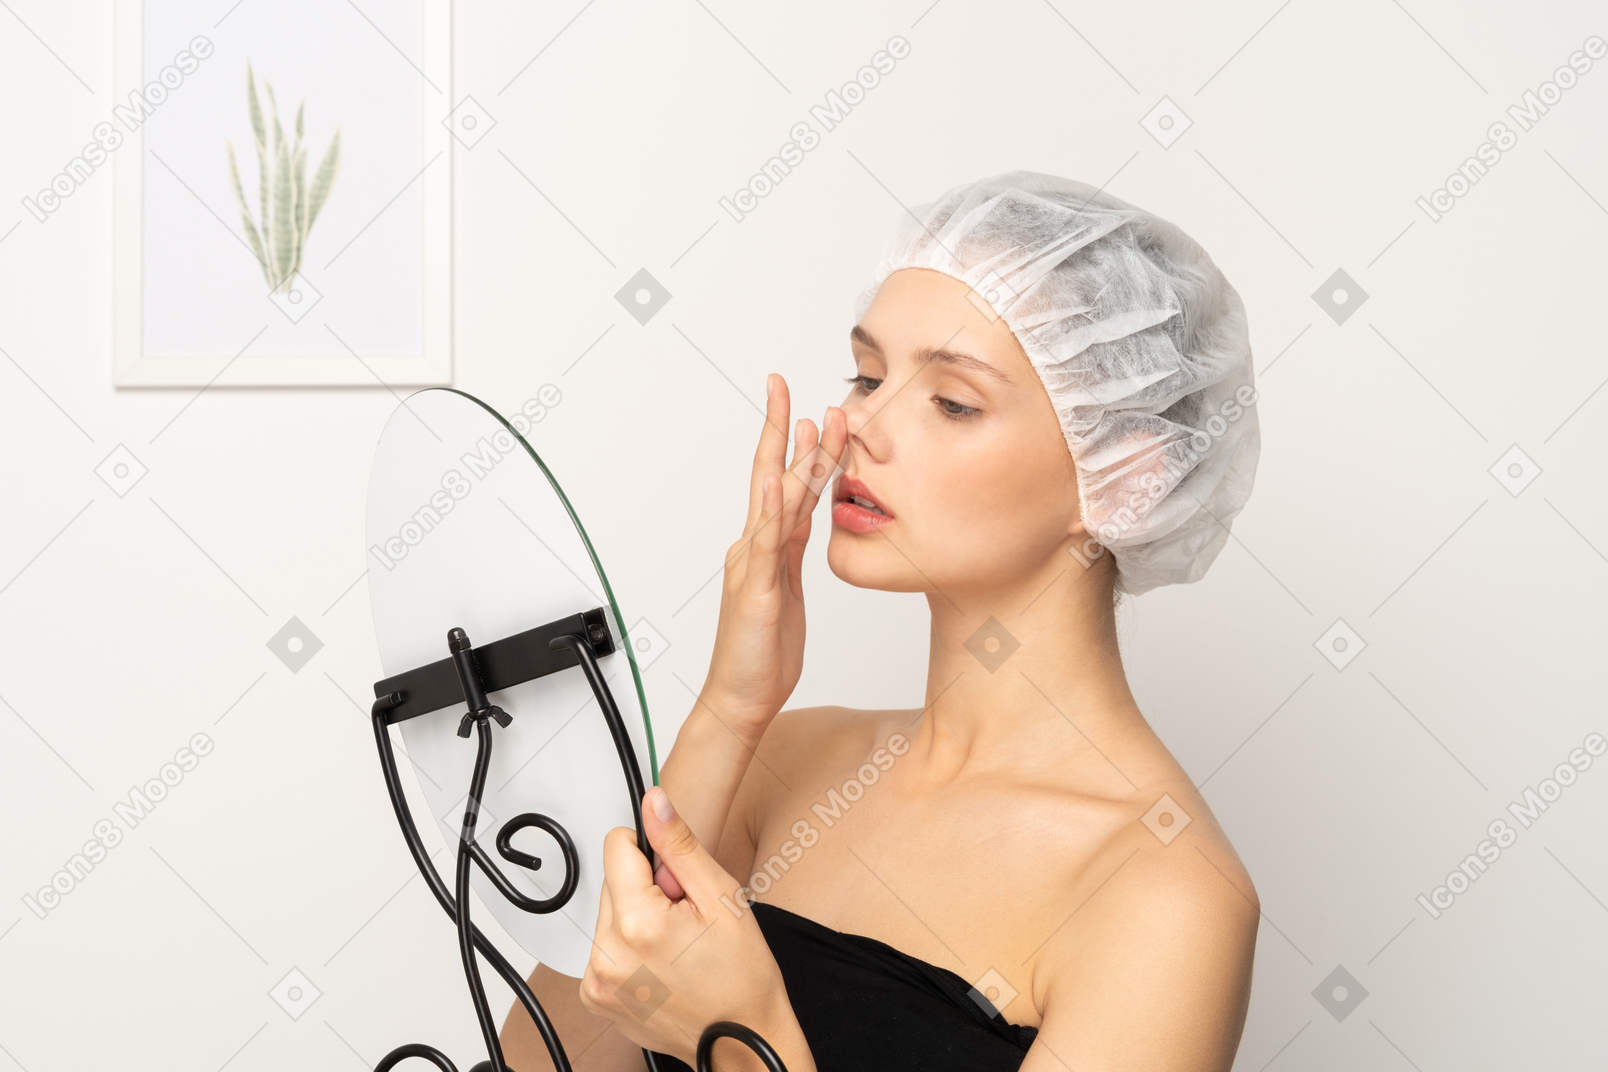 Young woman in medical cap lifting her nose while looking in the mirror